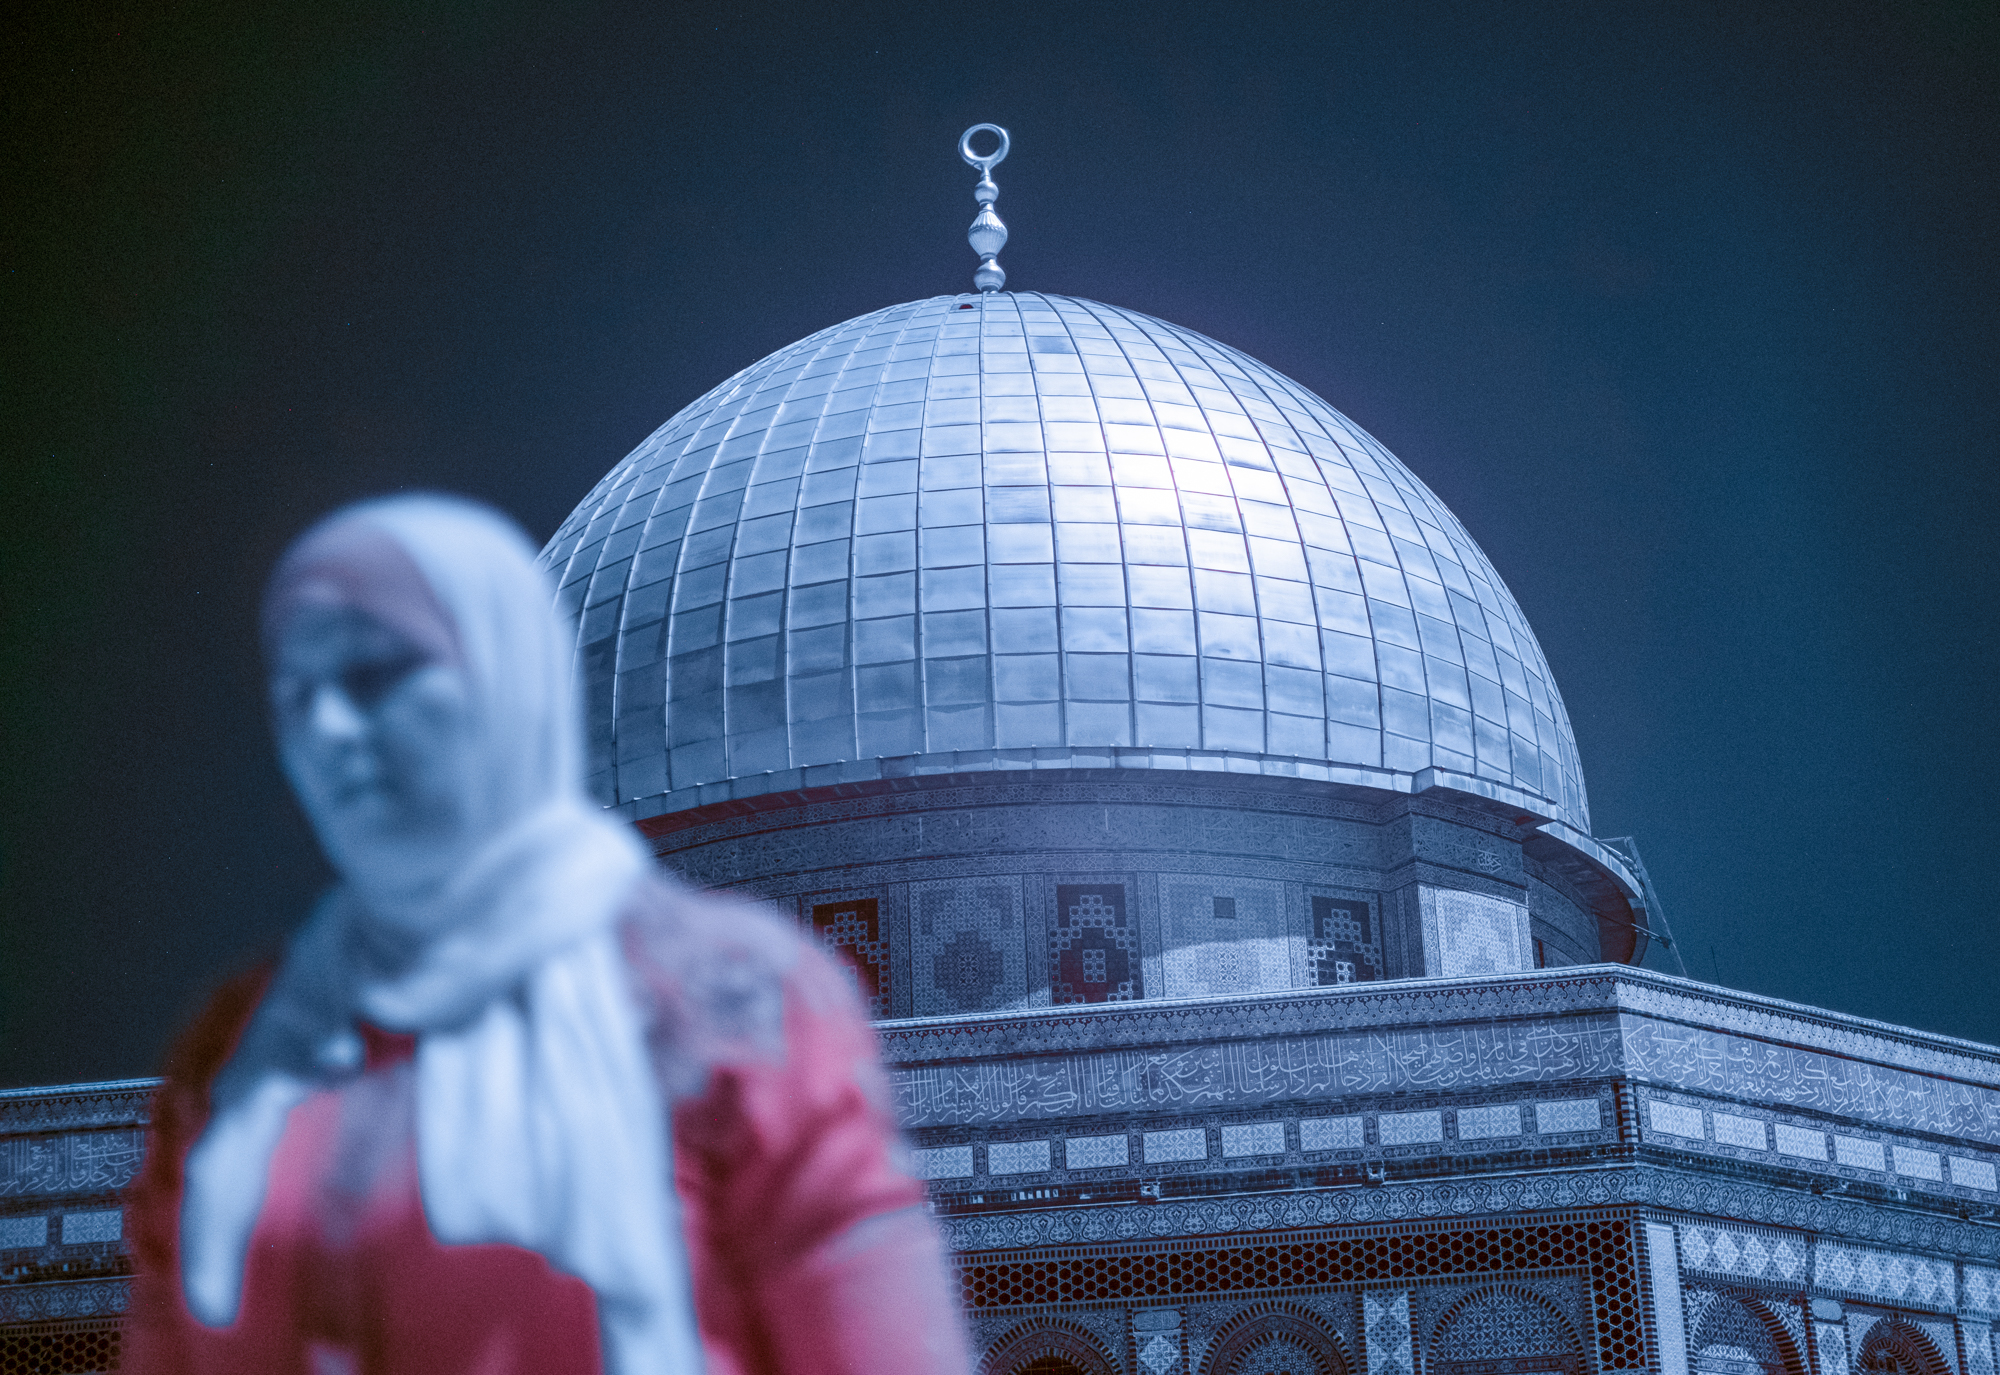 A woman walks past the Dome of the Rock, one of the holiest sites in Islam.